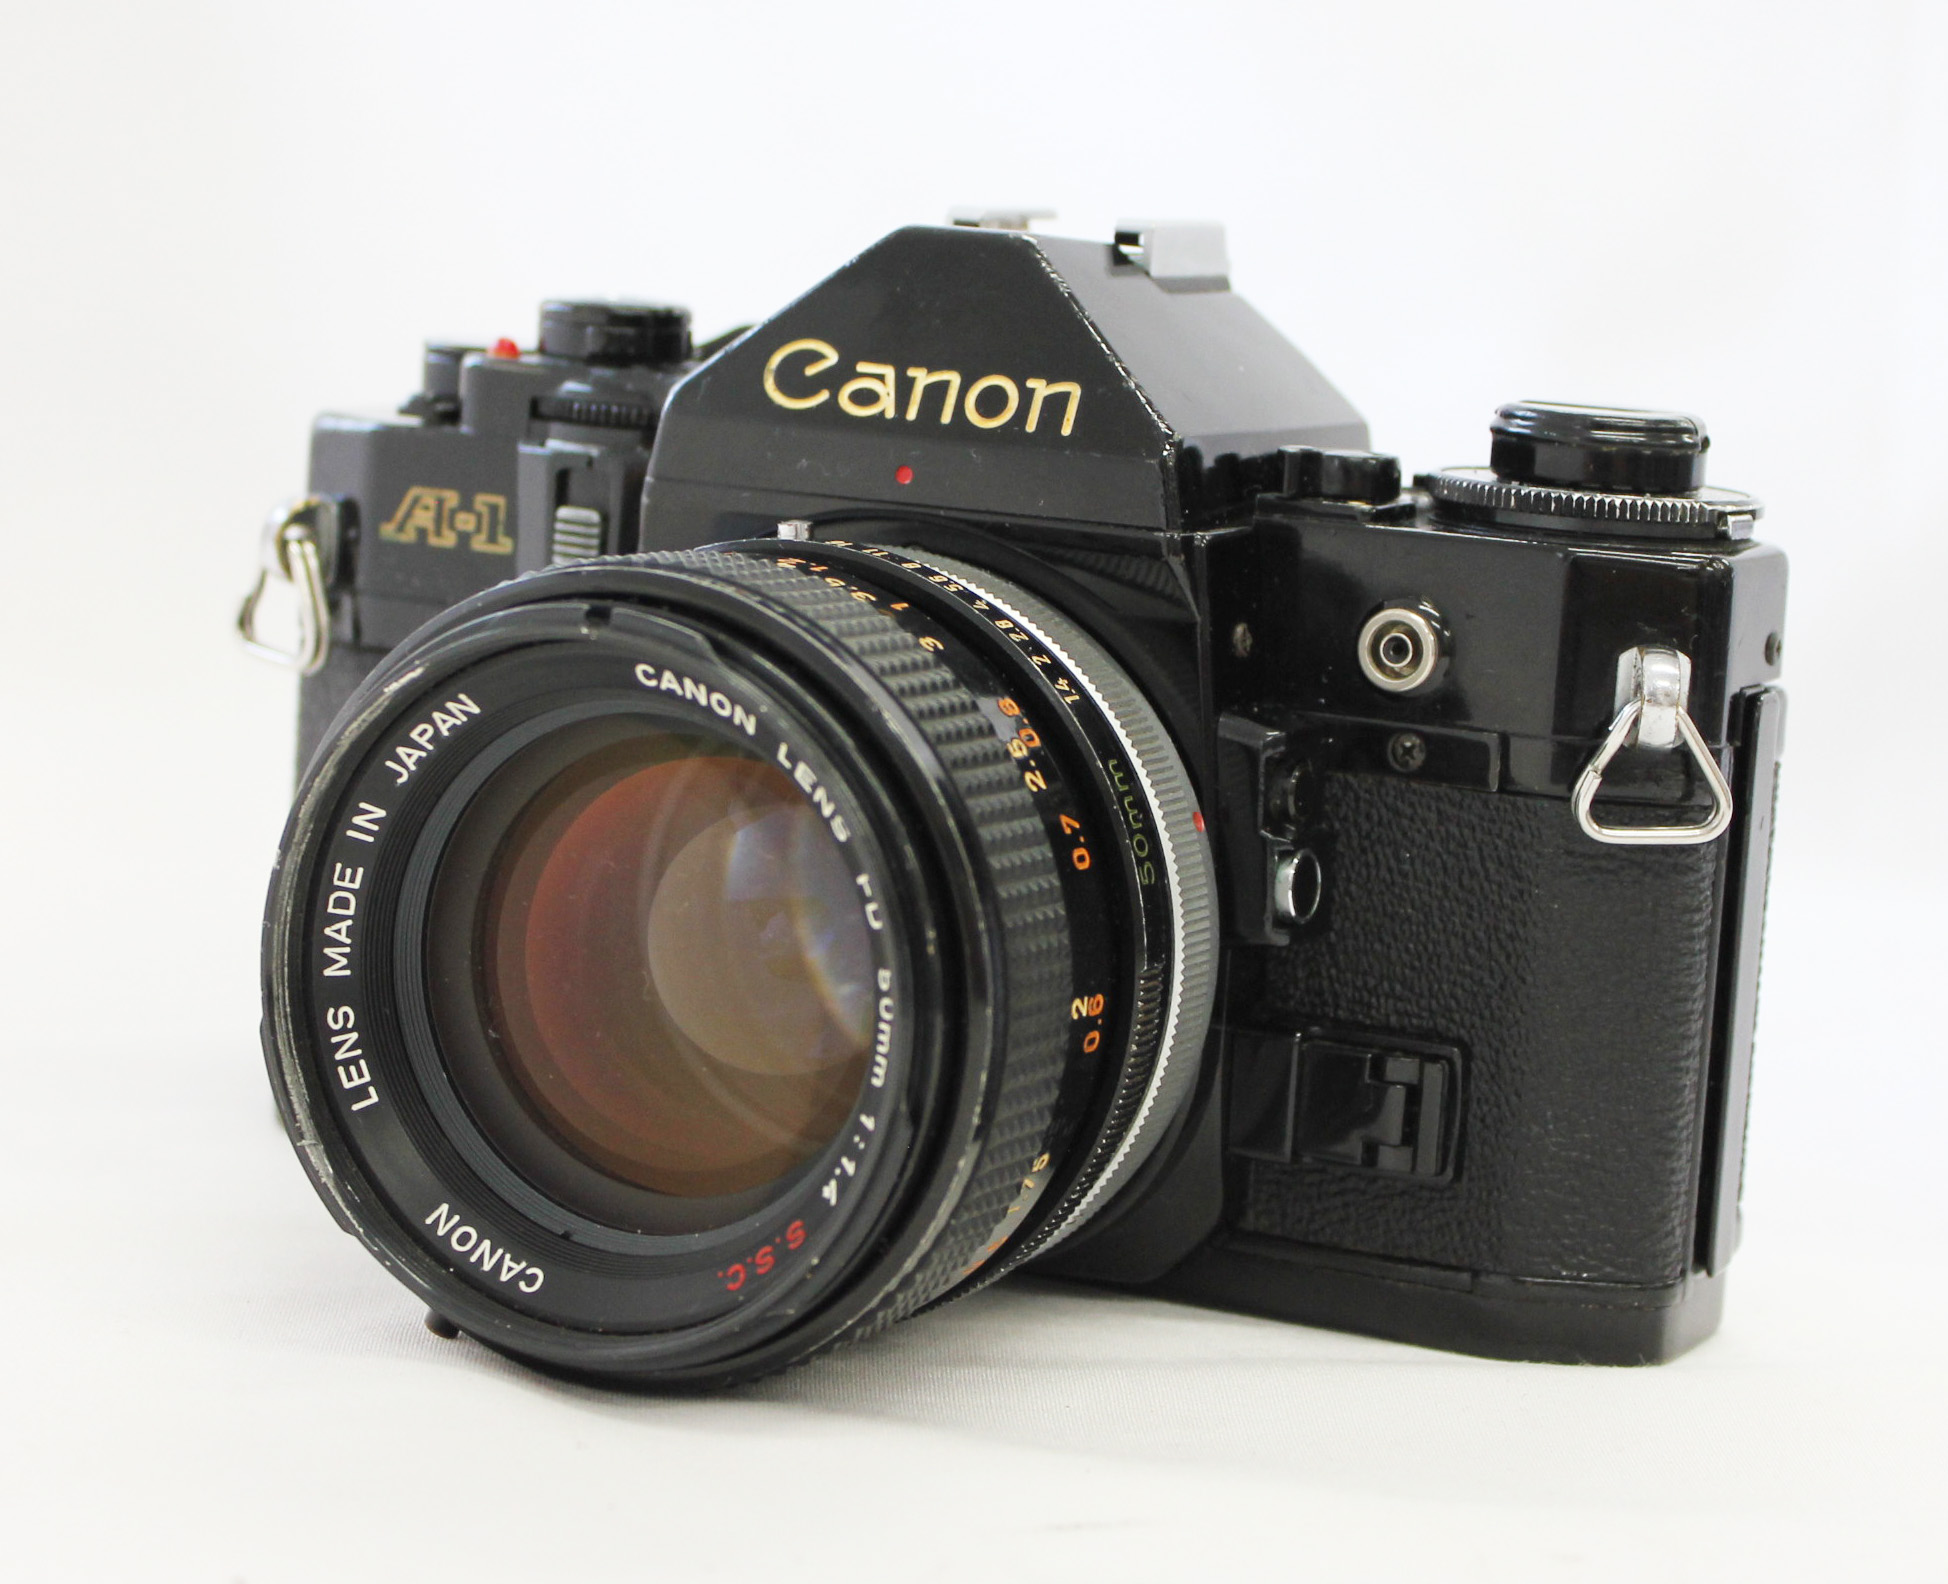 Japan Used Camera Shop | [Excellent+++] Canon A-1 35mm SLR Film Camera with FD 50mm F/1.4 S.S.C. Lens from Japan